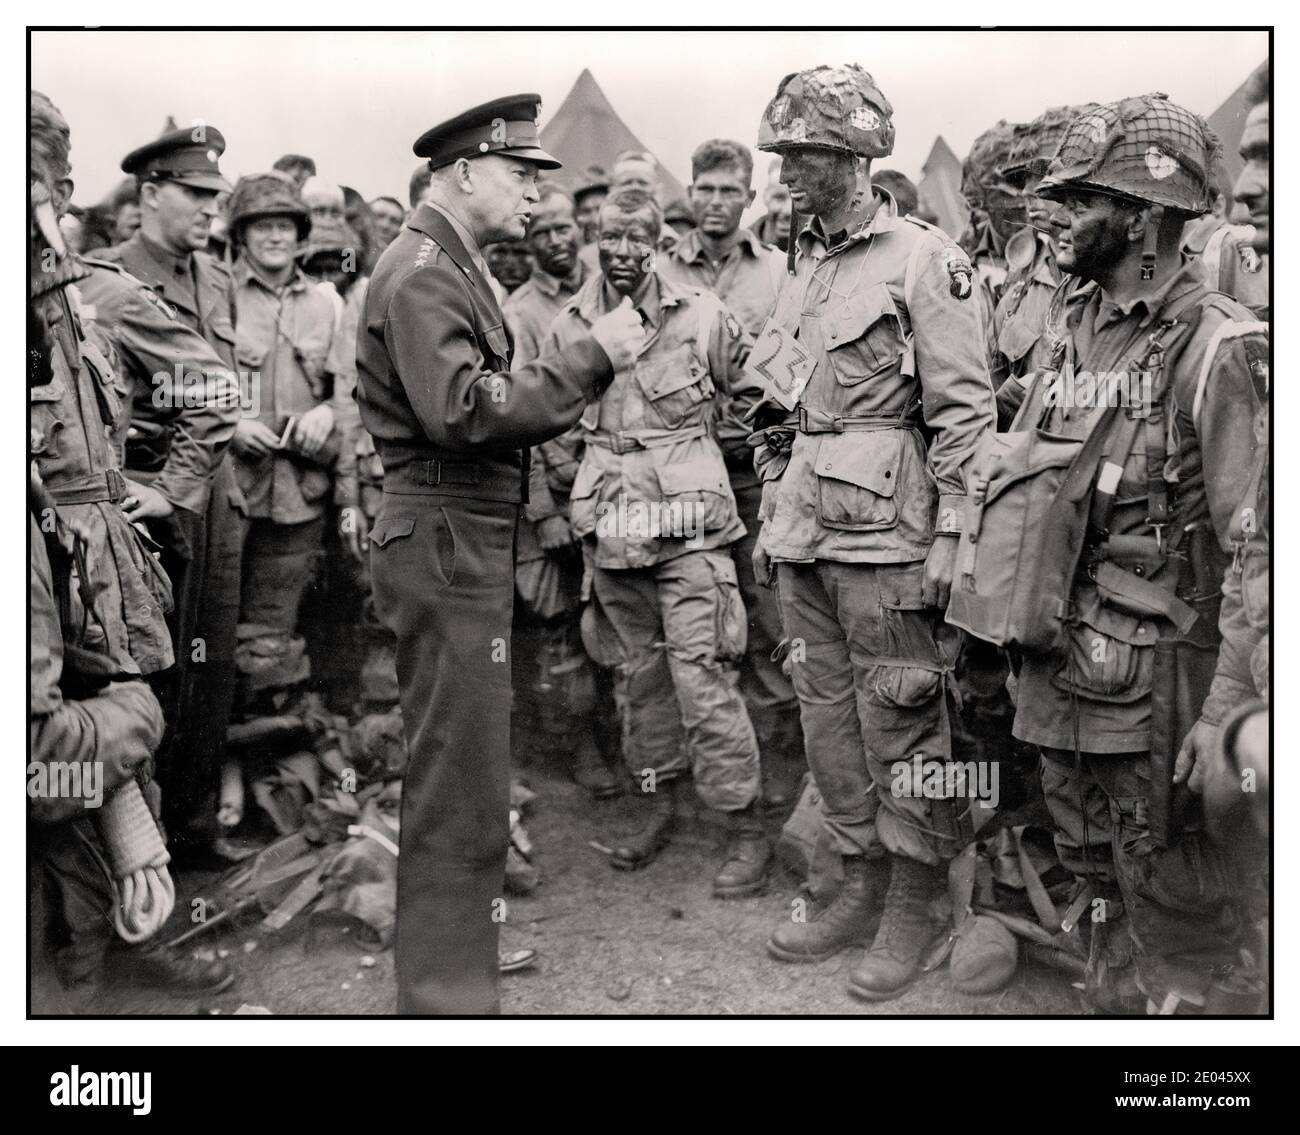 WW2 D-Day archive General Dwight D. Eisenhower gives the order of the day, 'Full victory--nothing else' to paratroopers somewhere in England, just before they board their airplanes to participate in the first assault in the invasion of the continent of Europe   1944 June 6  -  Eisenhower, Dwight D.--(Dwight David),--1890-1969--Military service -  United States.--Army.--Parachute Infantry Regiment, 502nd-- -  World War, 1939-1945--Military personnel--American--England Stock Photo